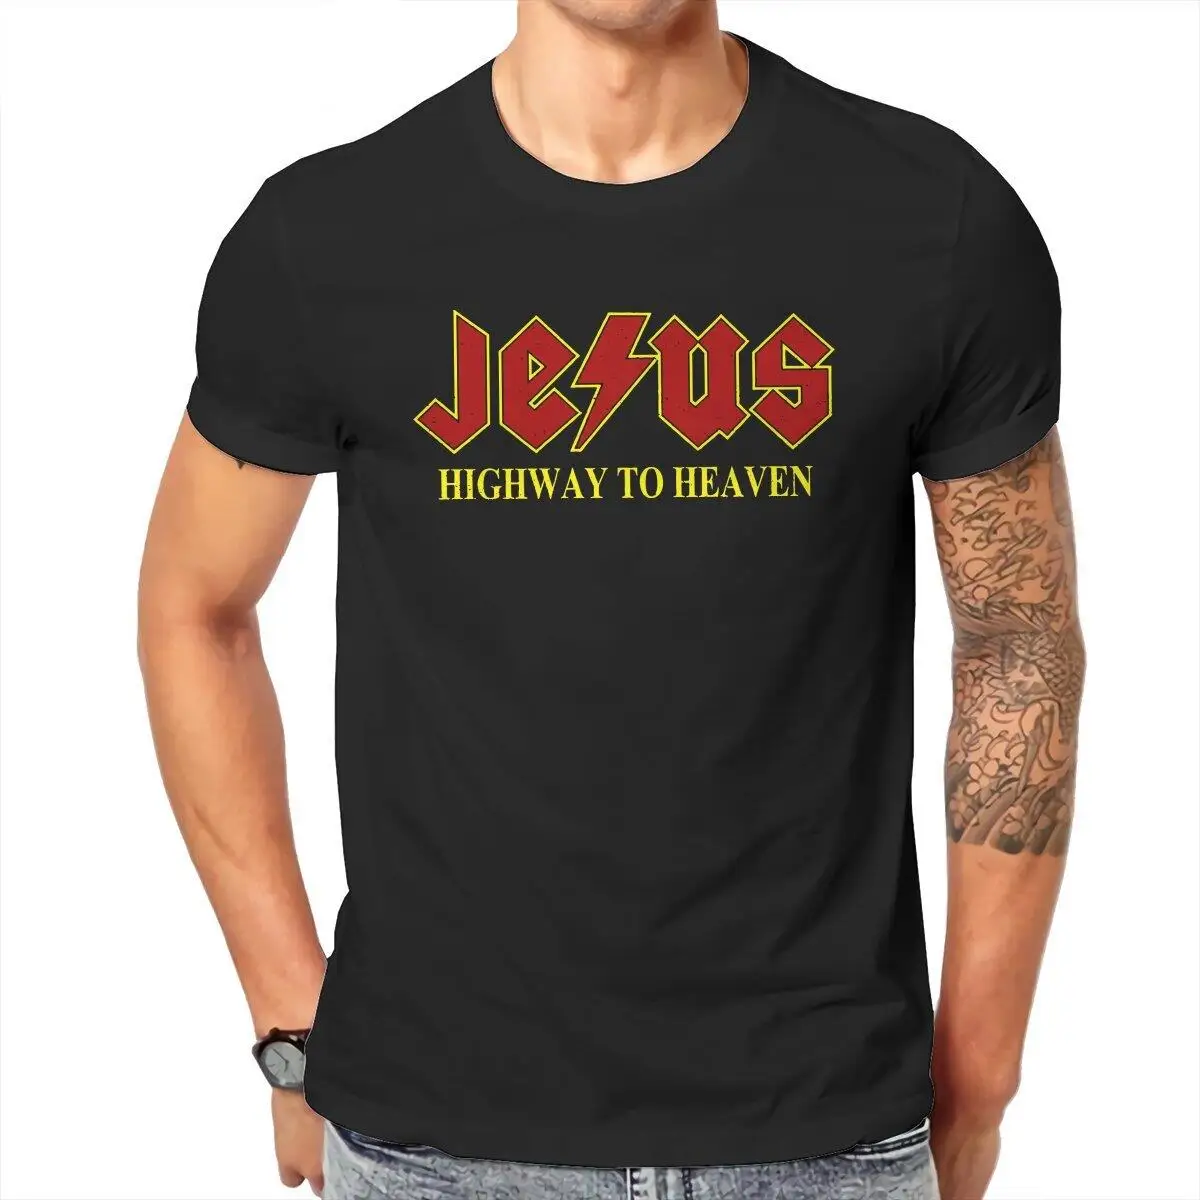 Vintage Jesus Rocks Highway to Heaven T-Shirts for Men O Neck Cotton T Shirt Christ Christian Religion Tees Printed Clothing